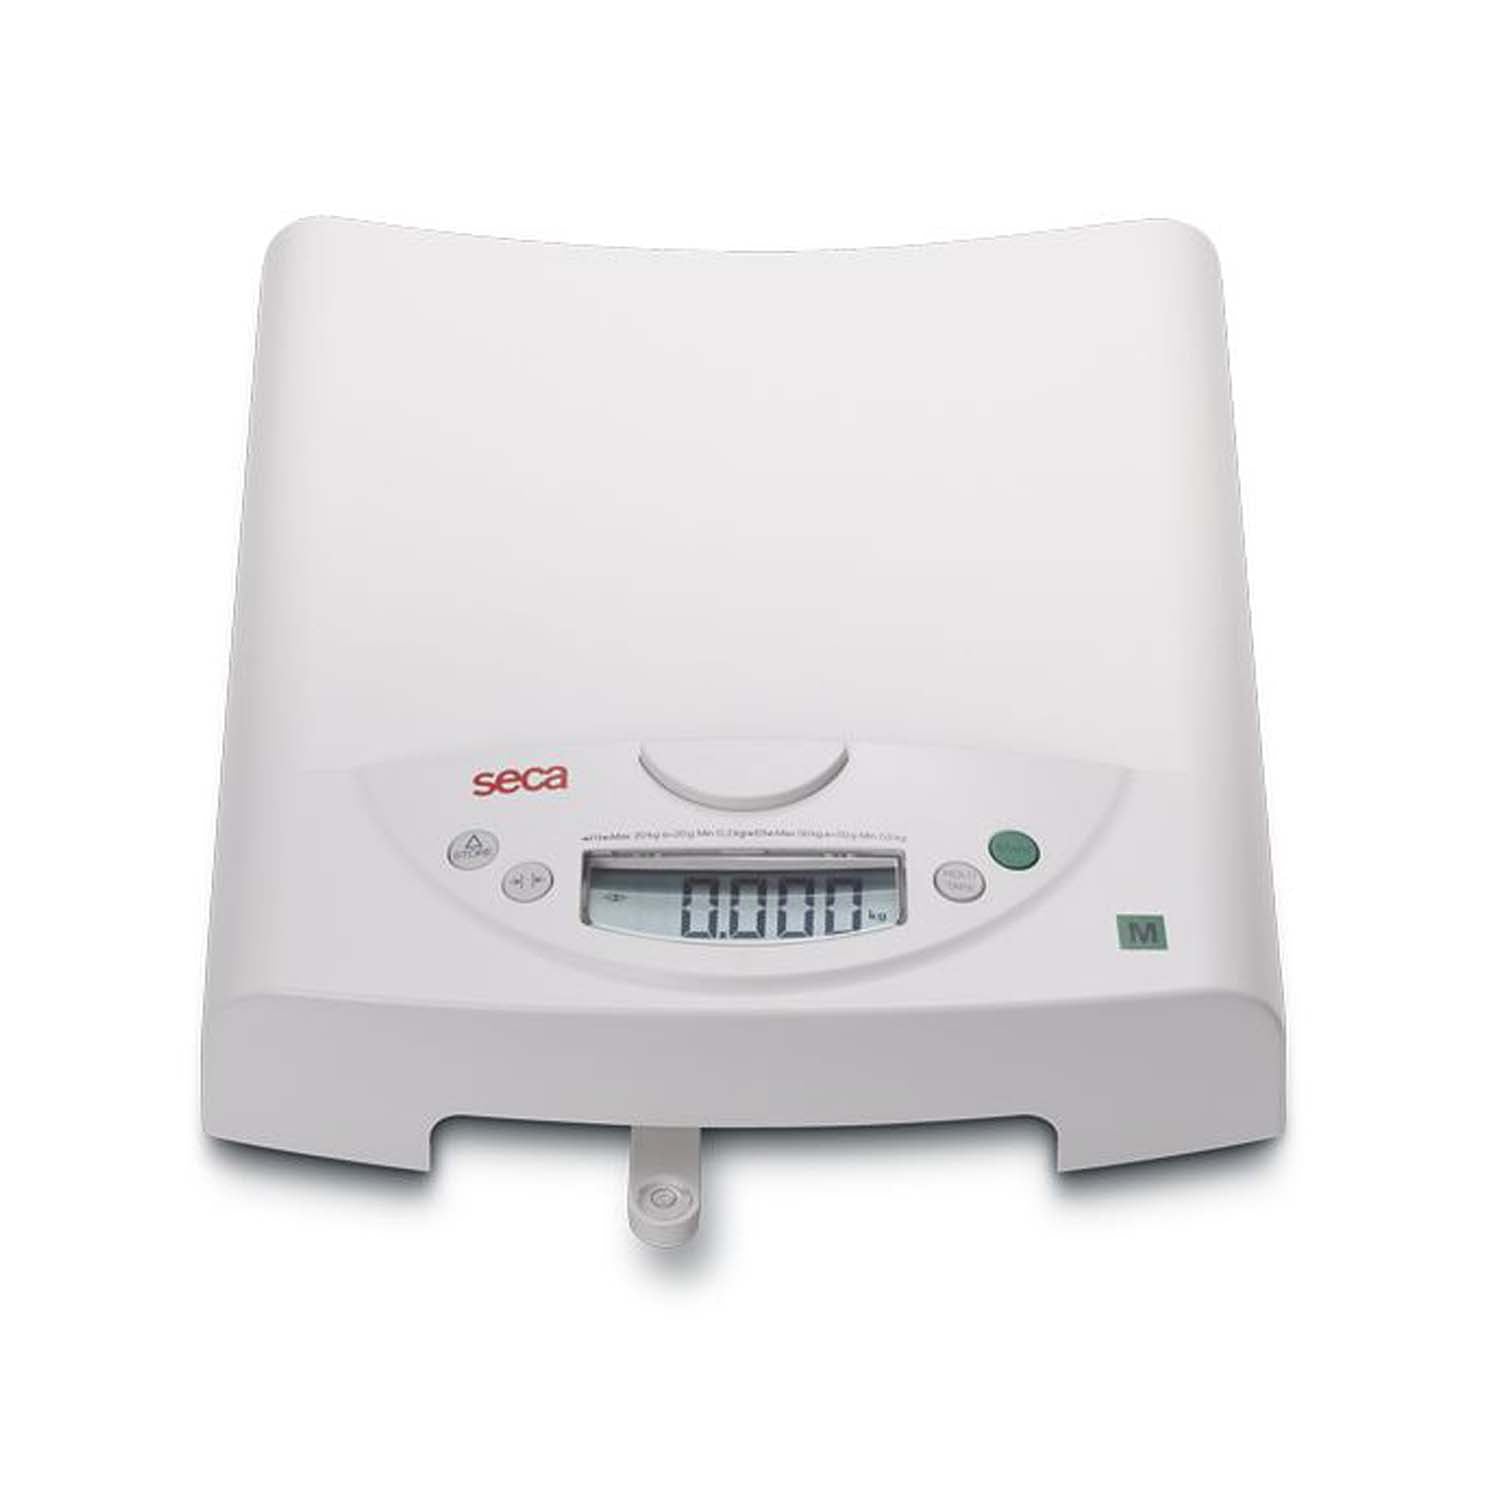 seca 384 Class (III) Approved Portable Electronic Baby and Toddler Scales (1)